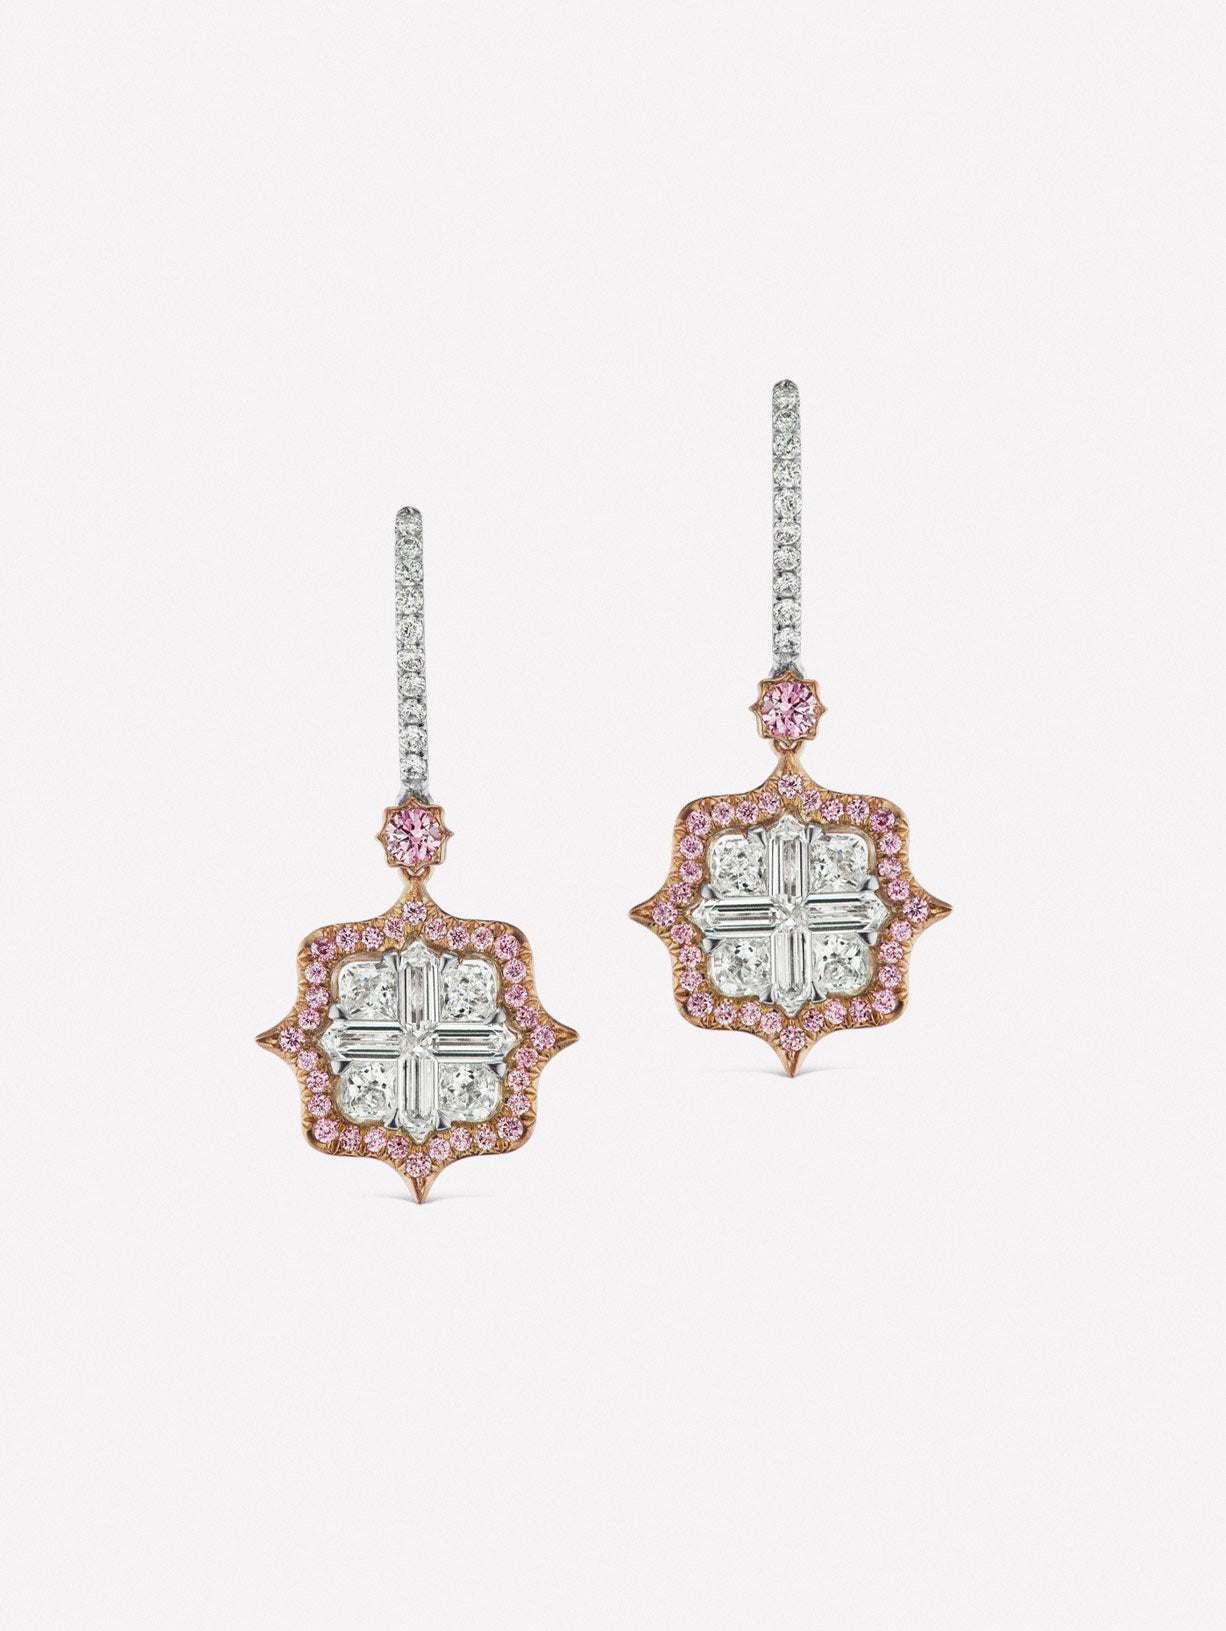 Argyle Pink™ Diamond Invisibly Set Cluster Earrings - Pink Diamonds, J FINE - J Fine, earrings - Pink Diamond Jewelry, argyle-pink™-diamond-invisibly-set-cluster-earrings-by-j-f-i-n-e - A